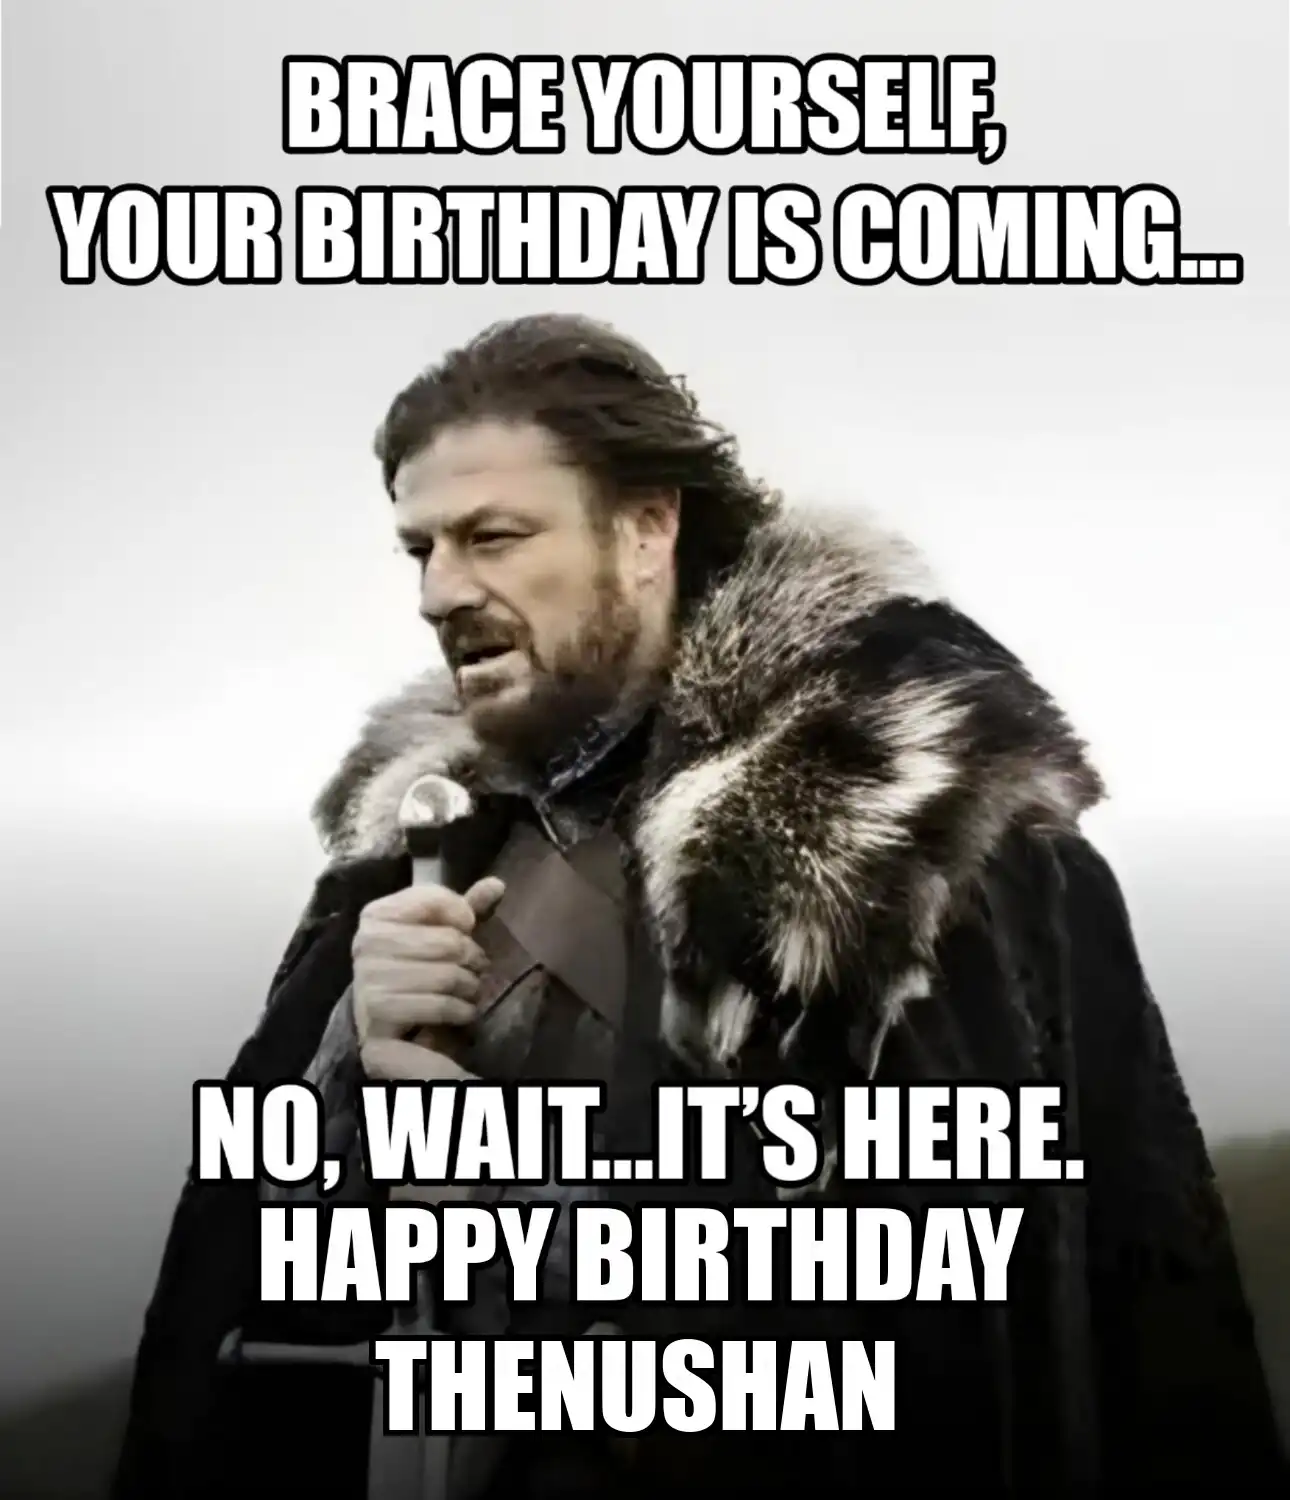 Happy Birthday Thenushan Brace Yourself Your Birthday Is Coming Meme